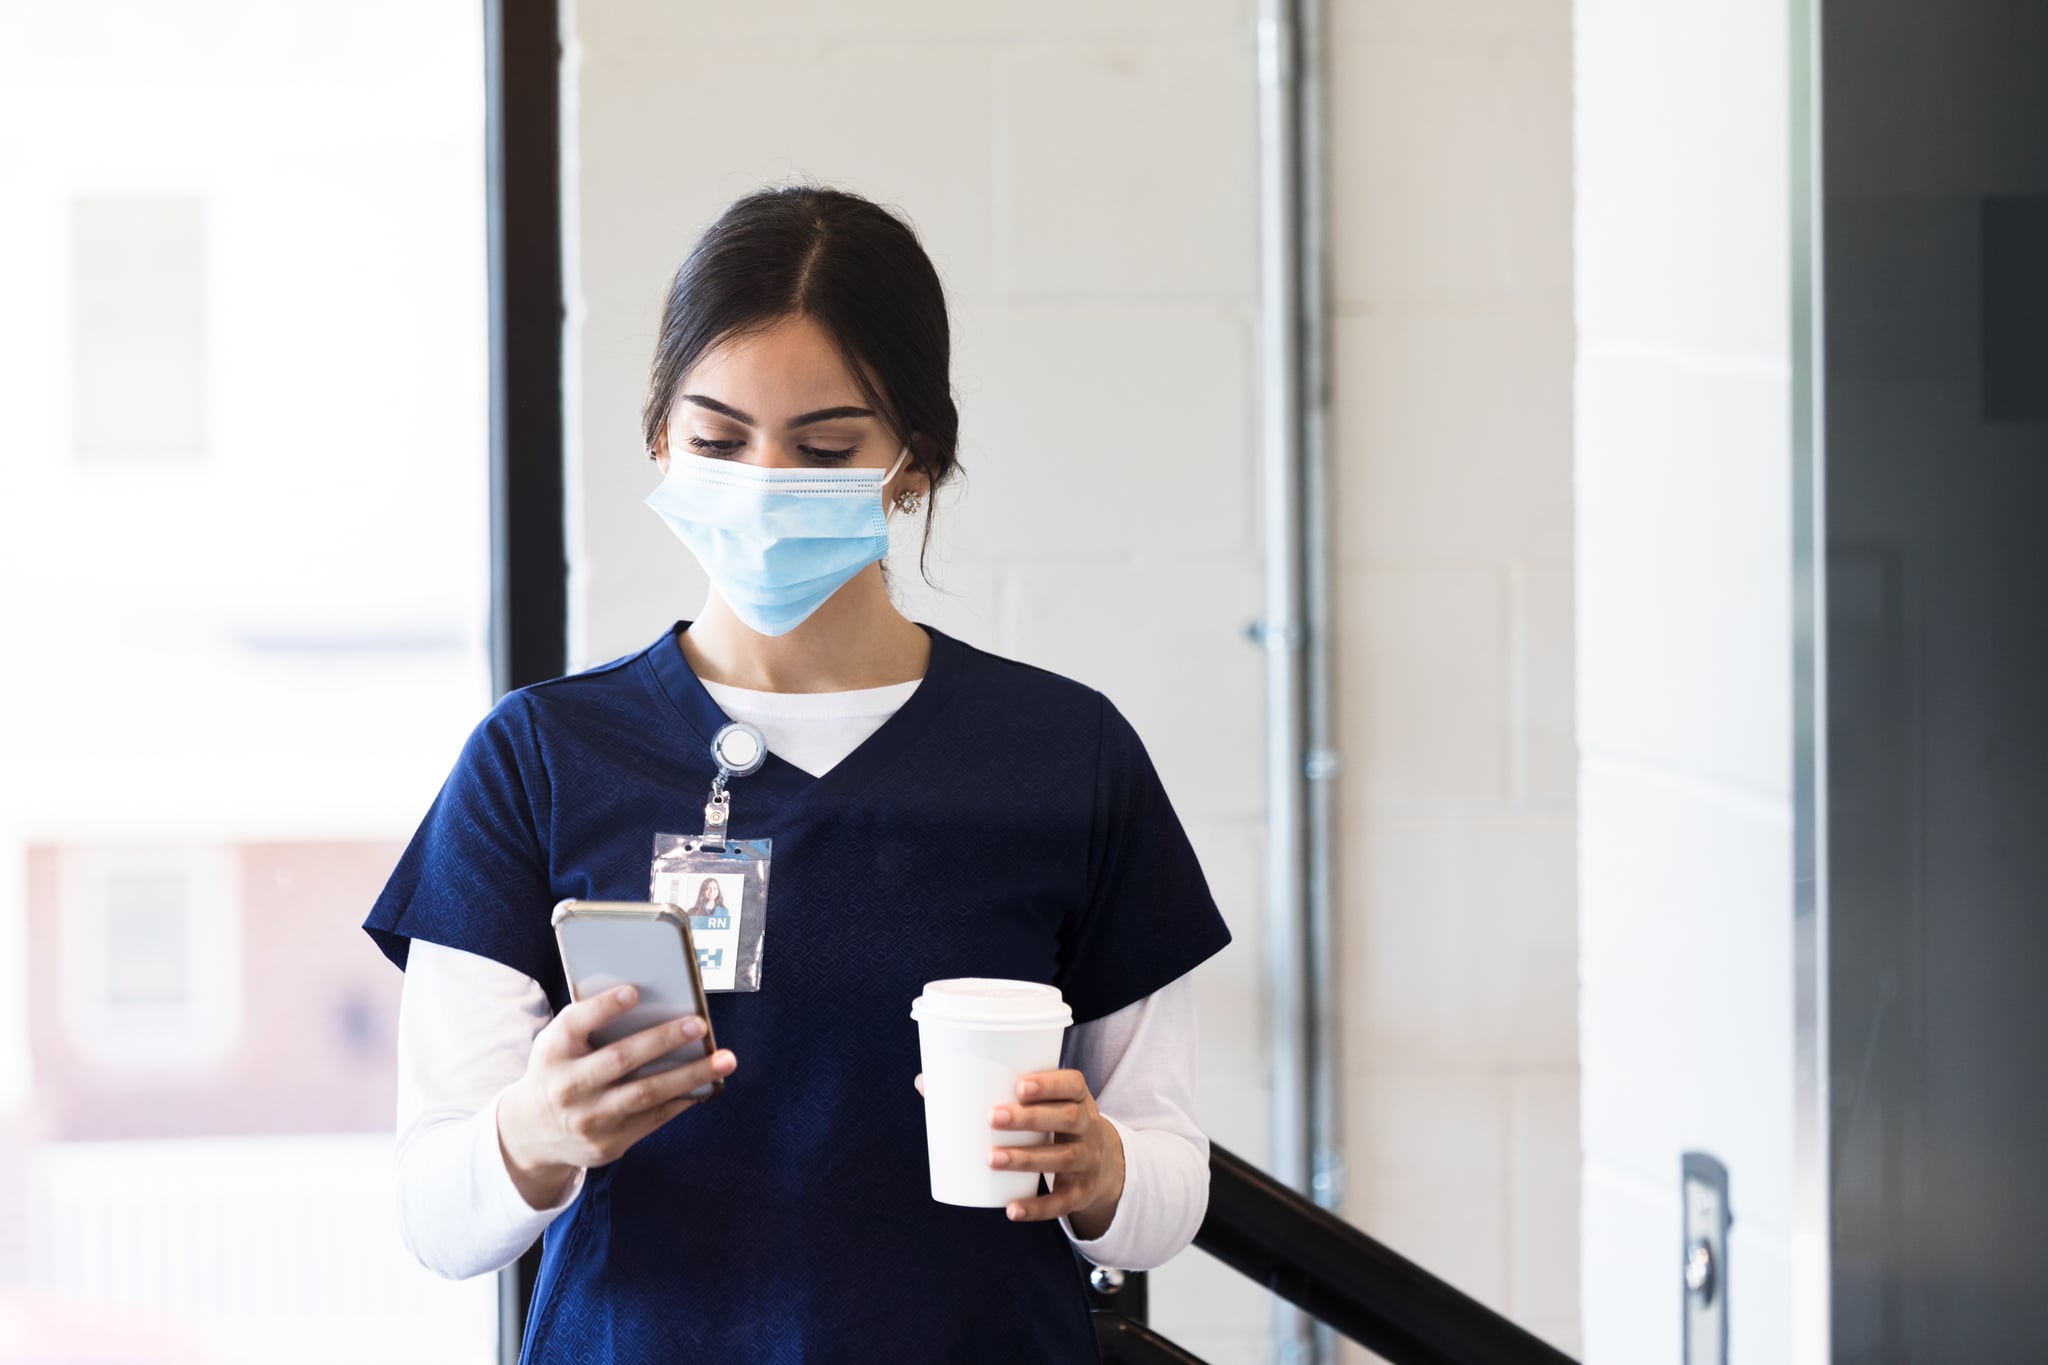 A female healthcare professional reads messages on her phone as she arrives for a hospital shift. She is wearing a protective face mask.